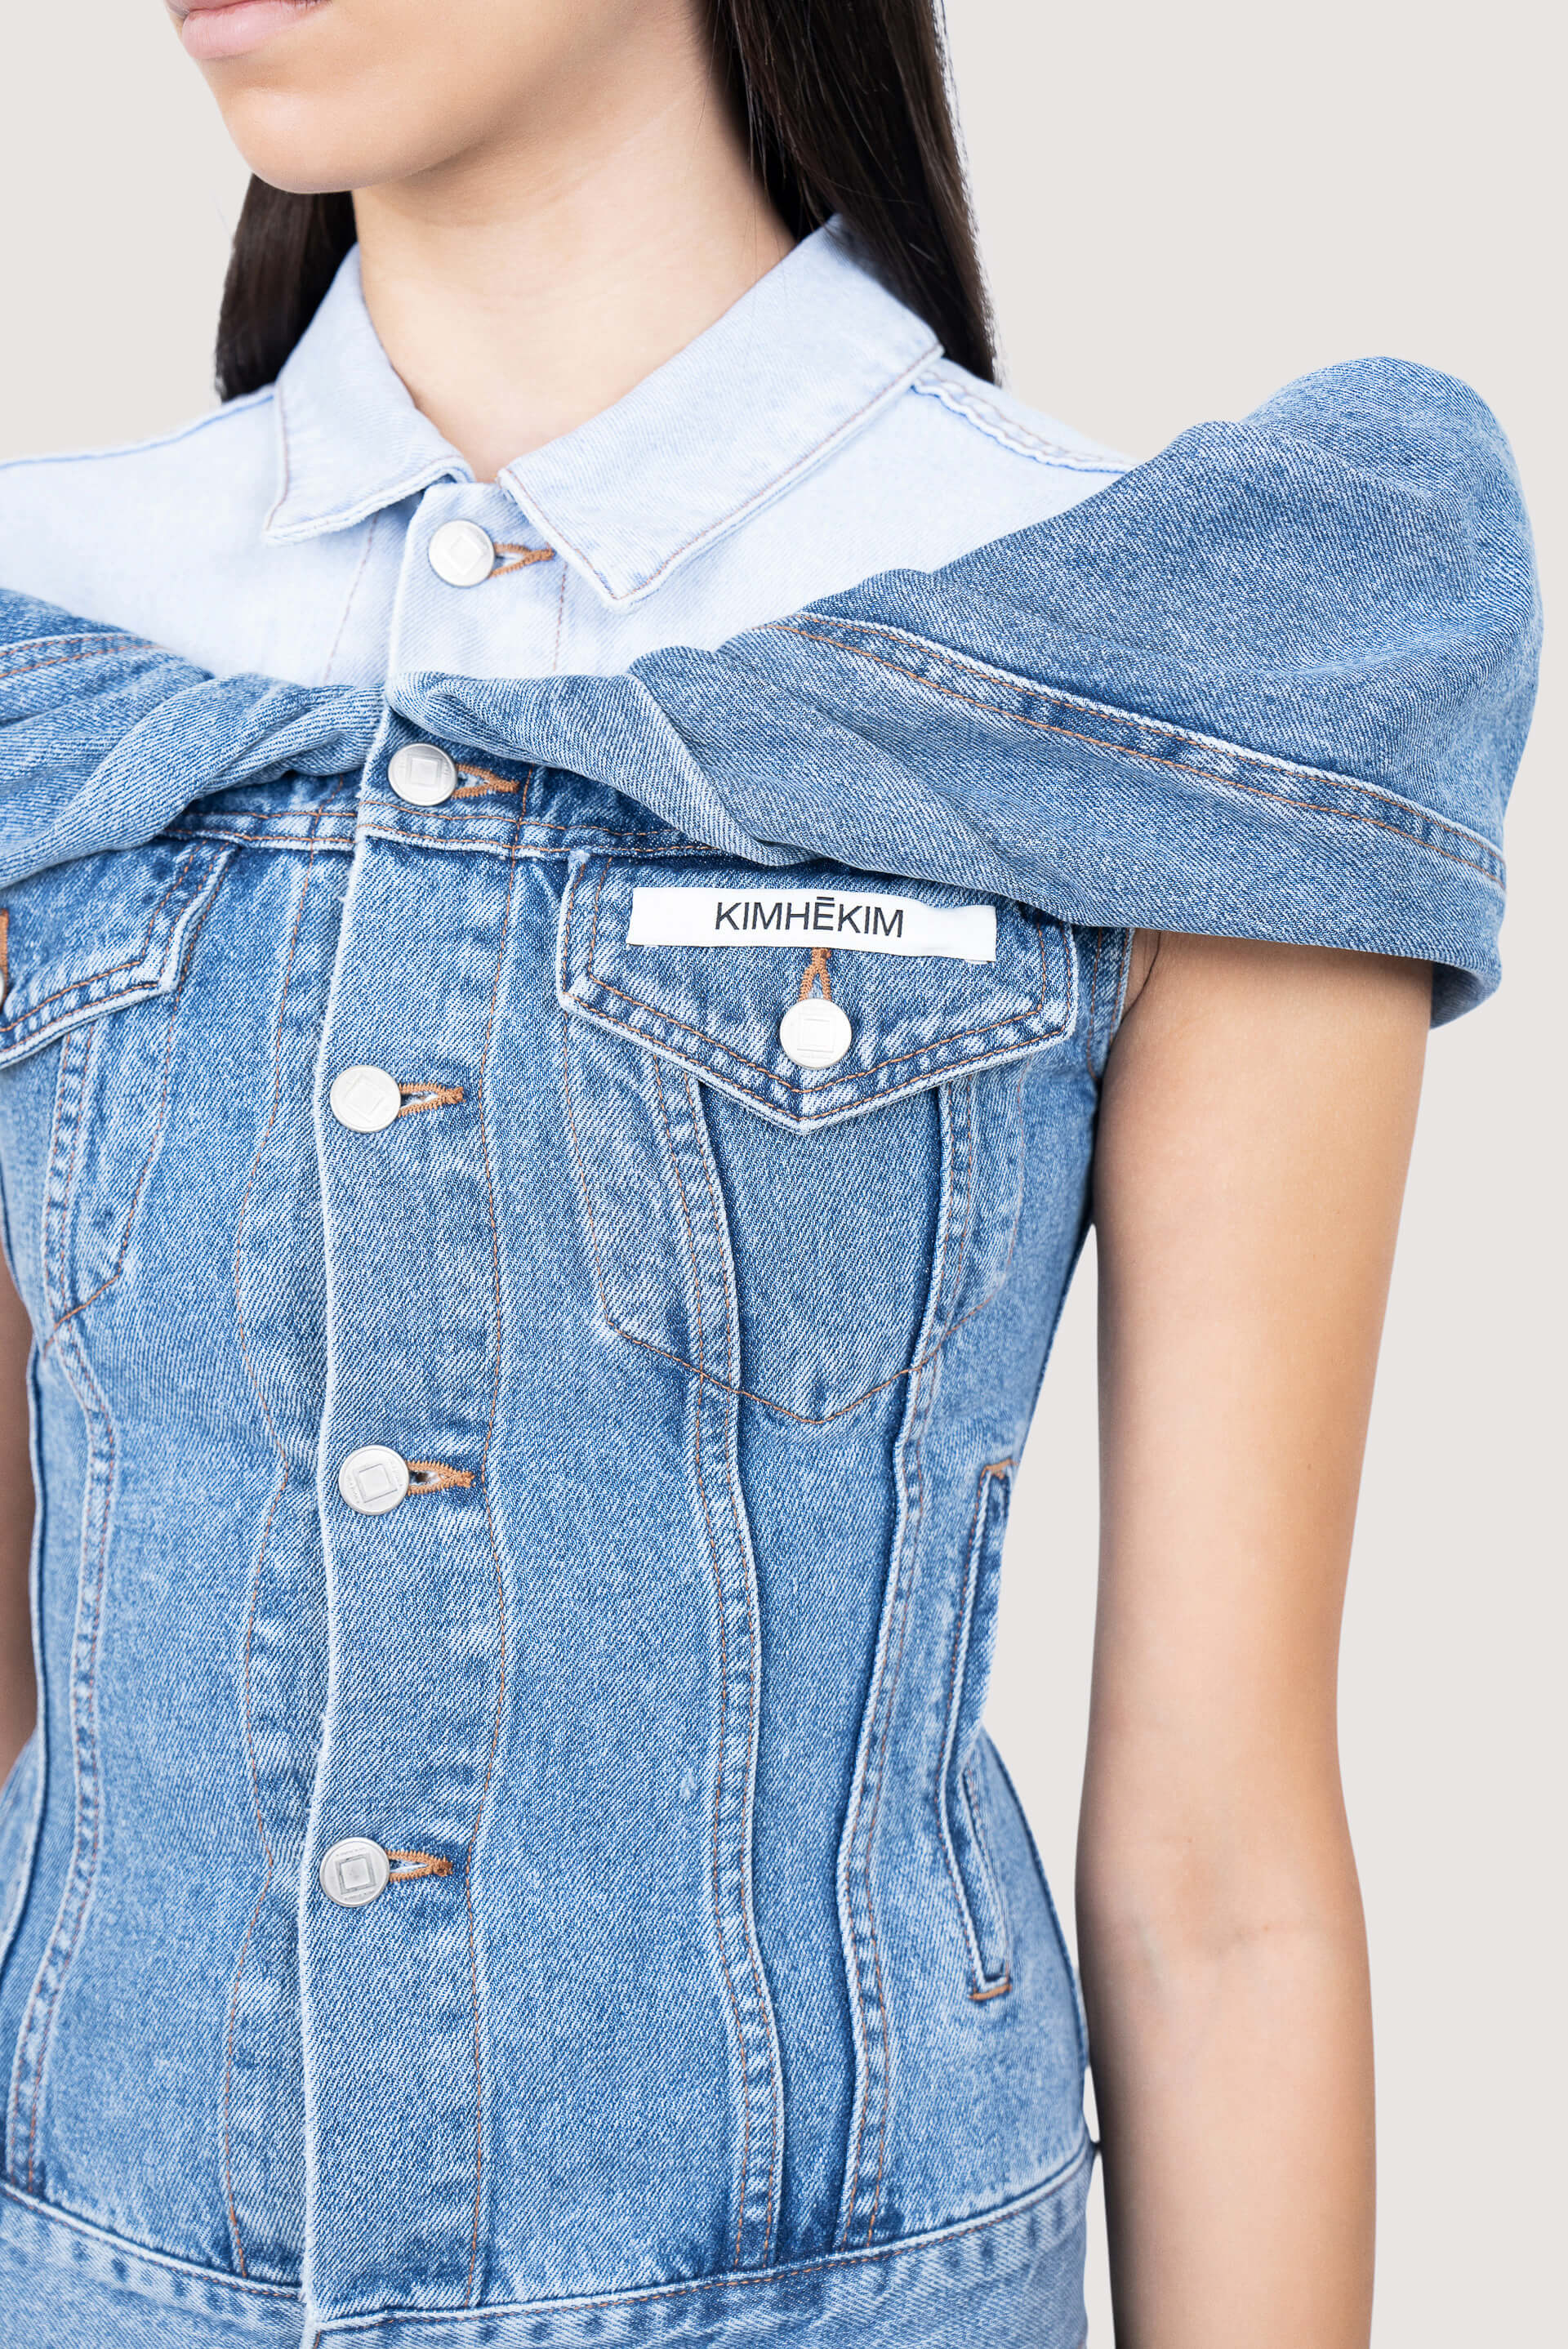 DENIM AND PATTERNED CORSET JACKET/TOP – CHAYKE